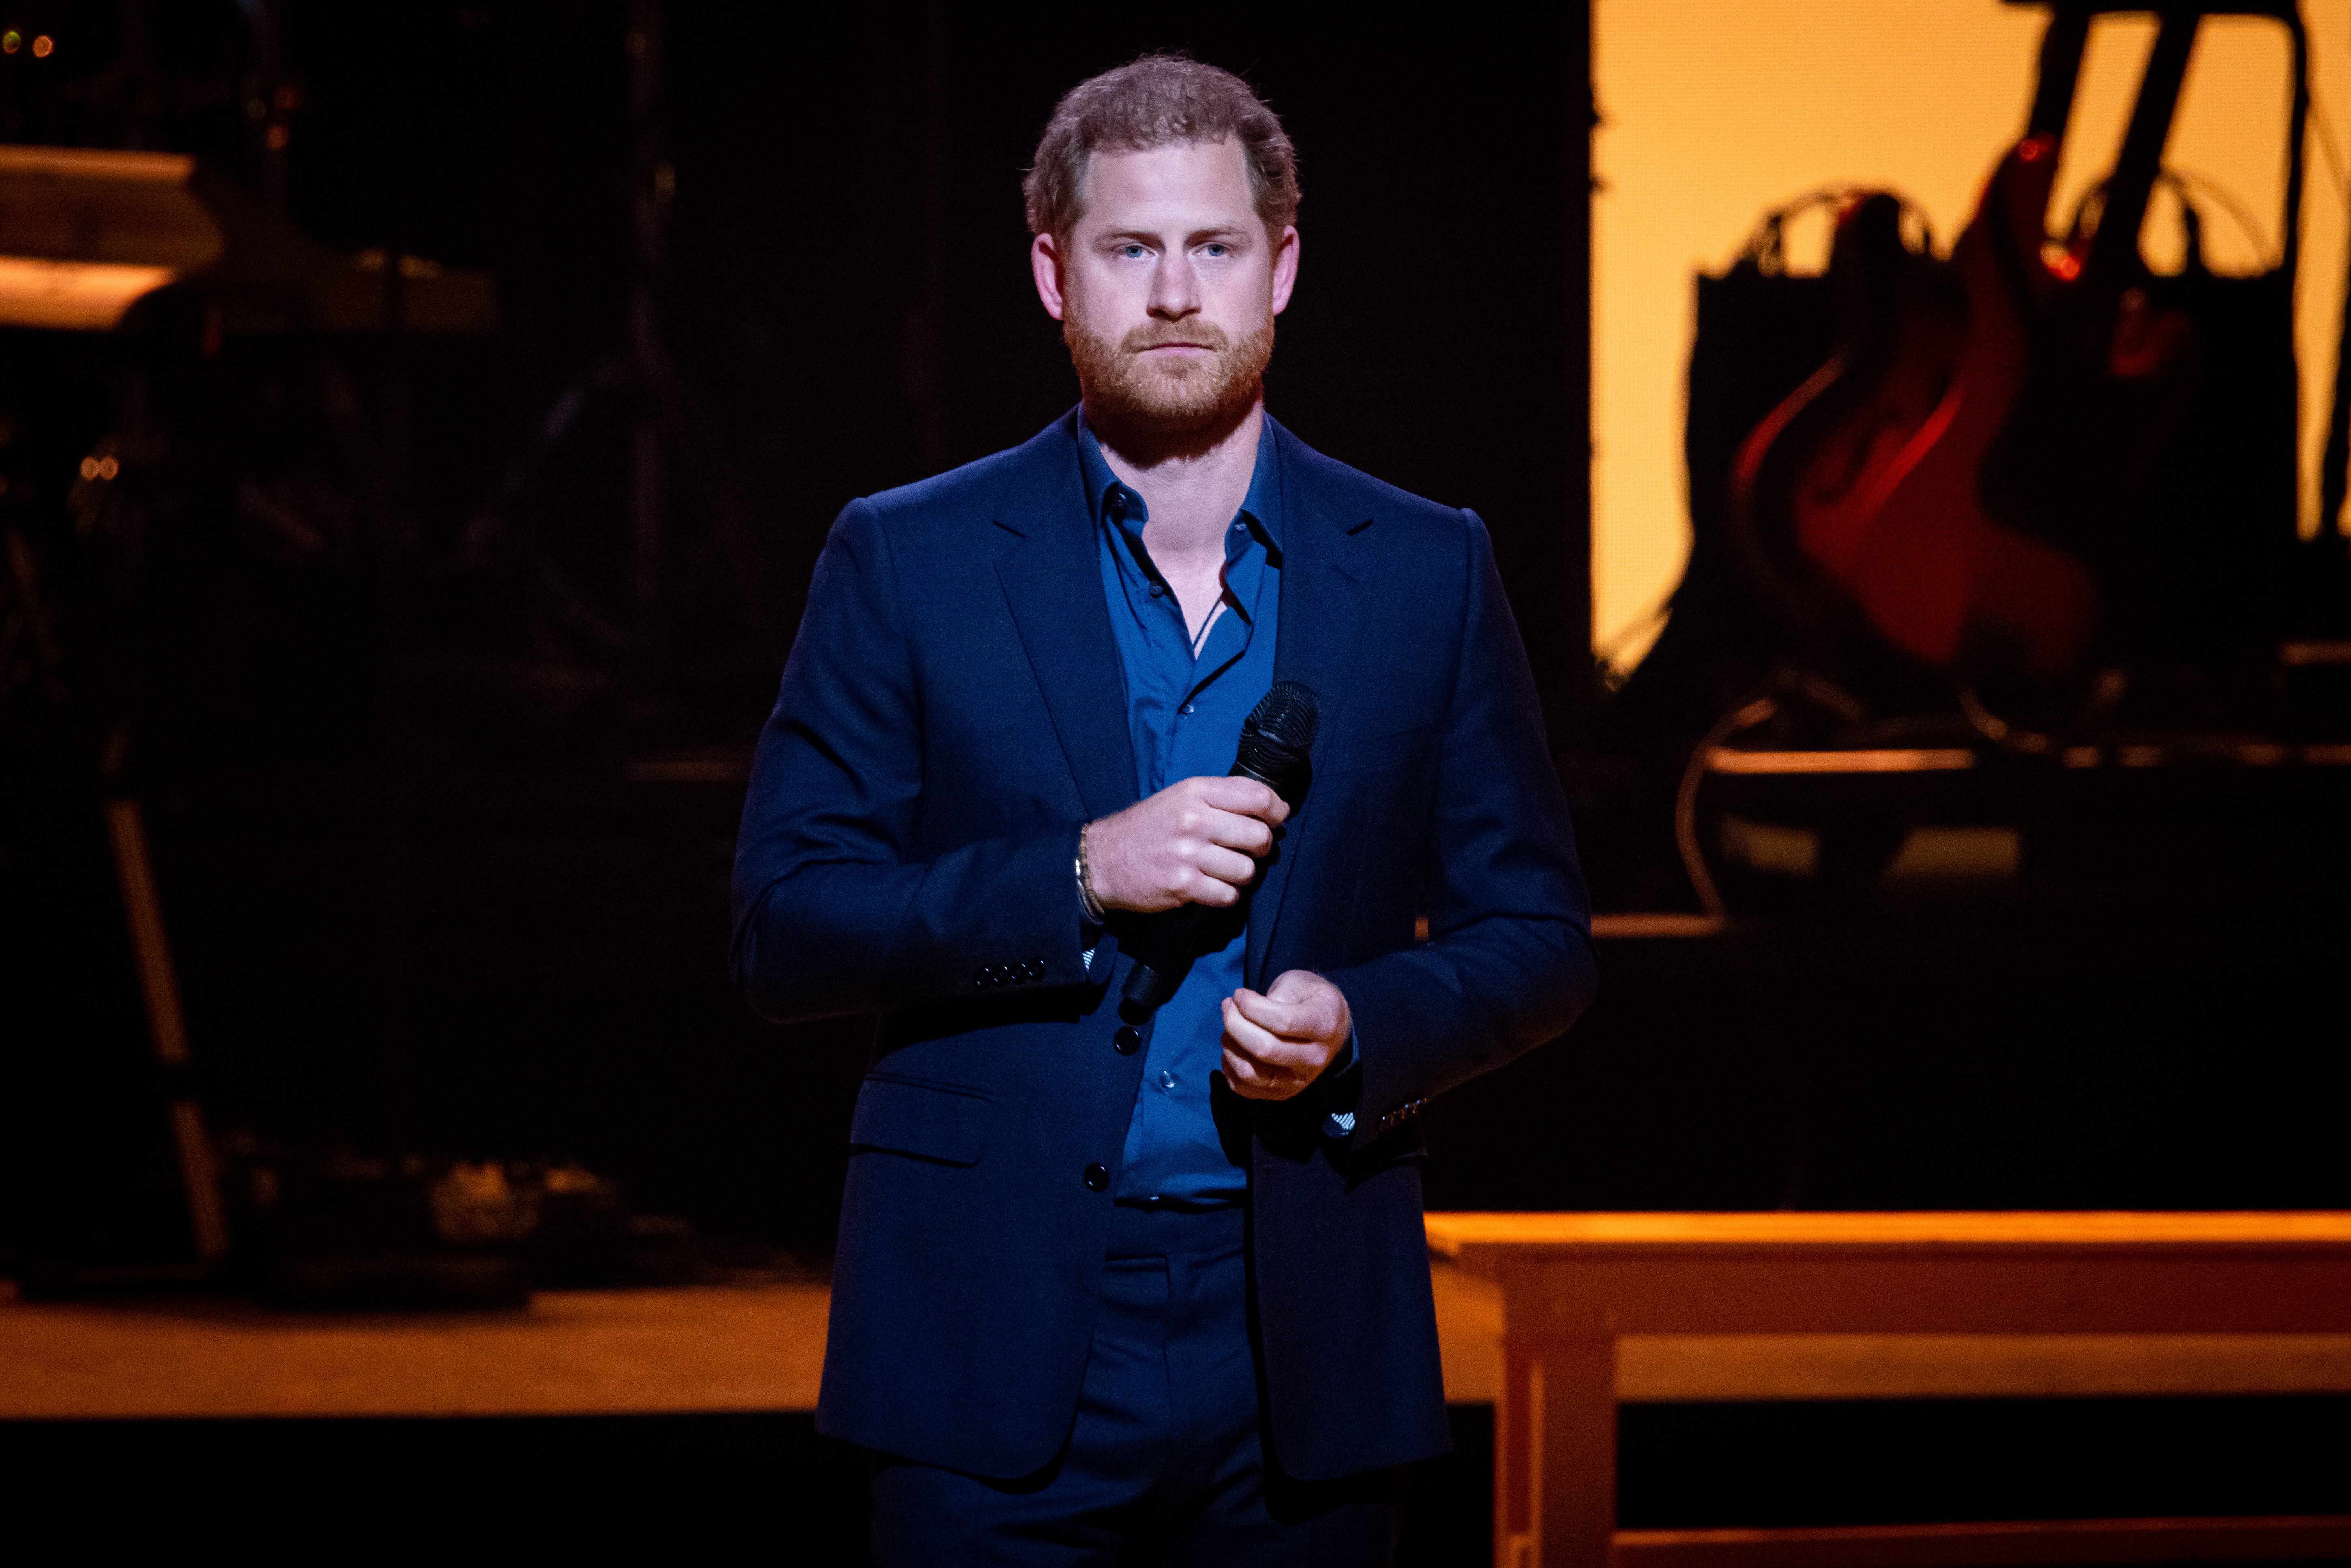 Prince Harry during the closing ceremony of the Invictus Games at Zuiderpark on April 22, 2022 in The Hague, Netherlands. / Source: Getty Images